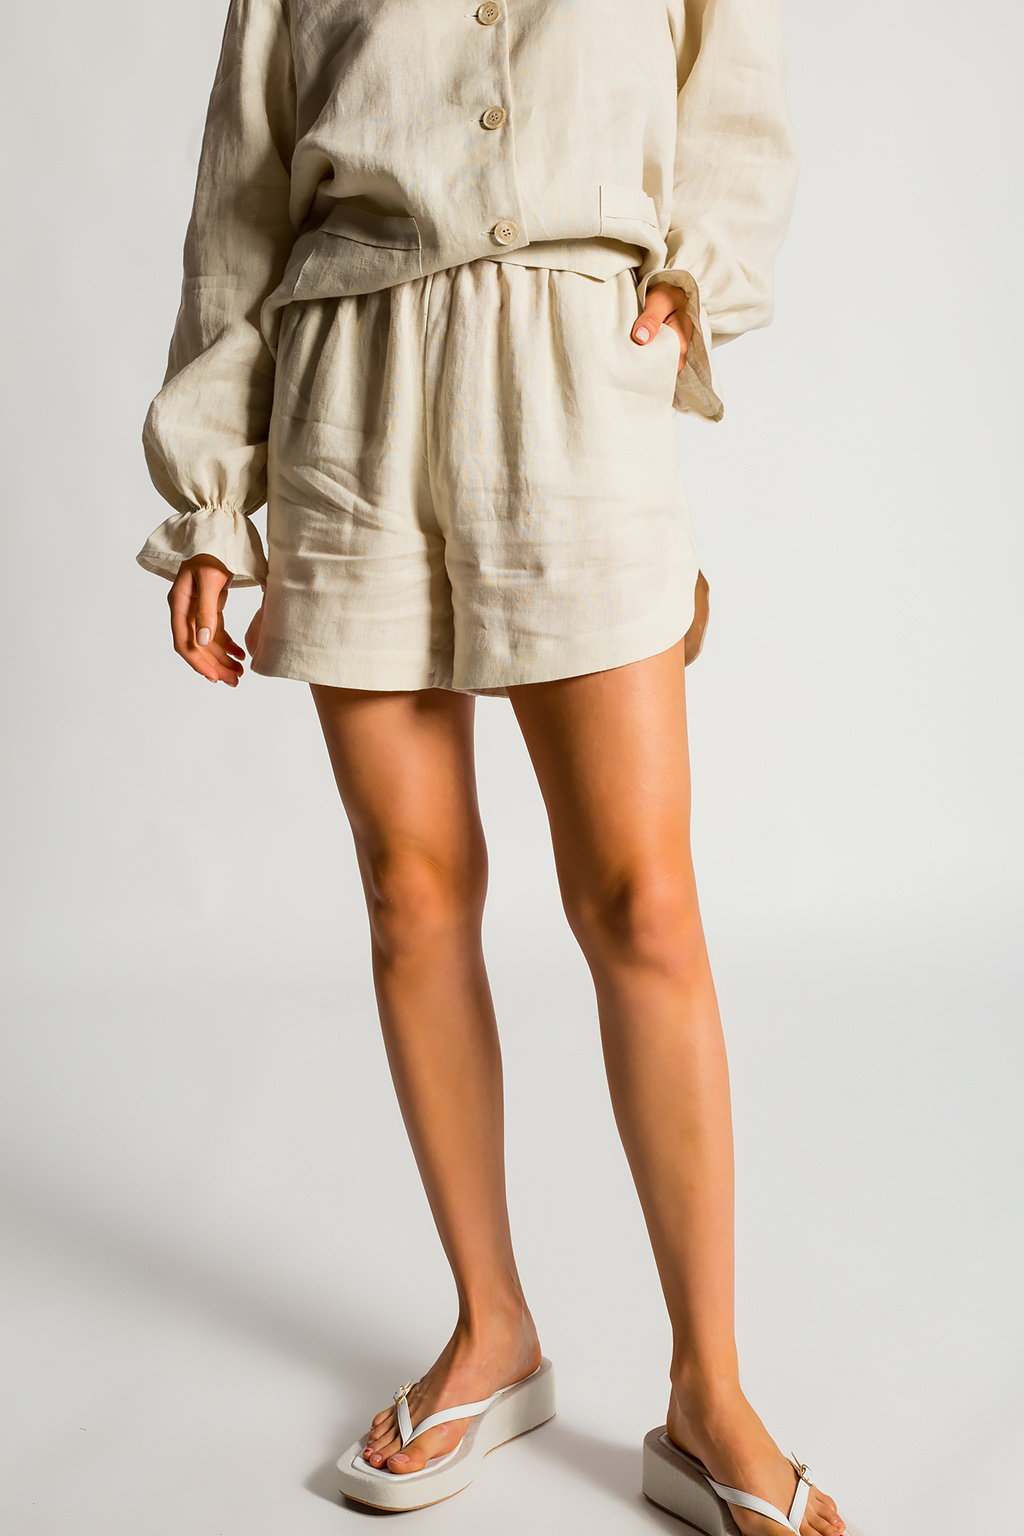 knit jumper dress in ivory ‘Lucie’ linen shorts